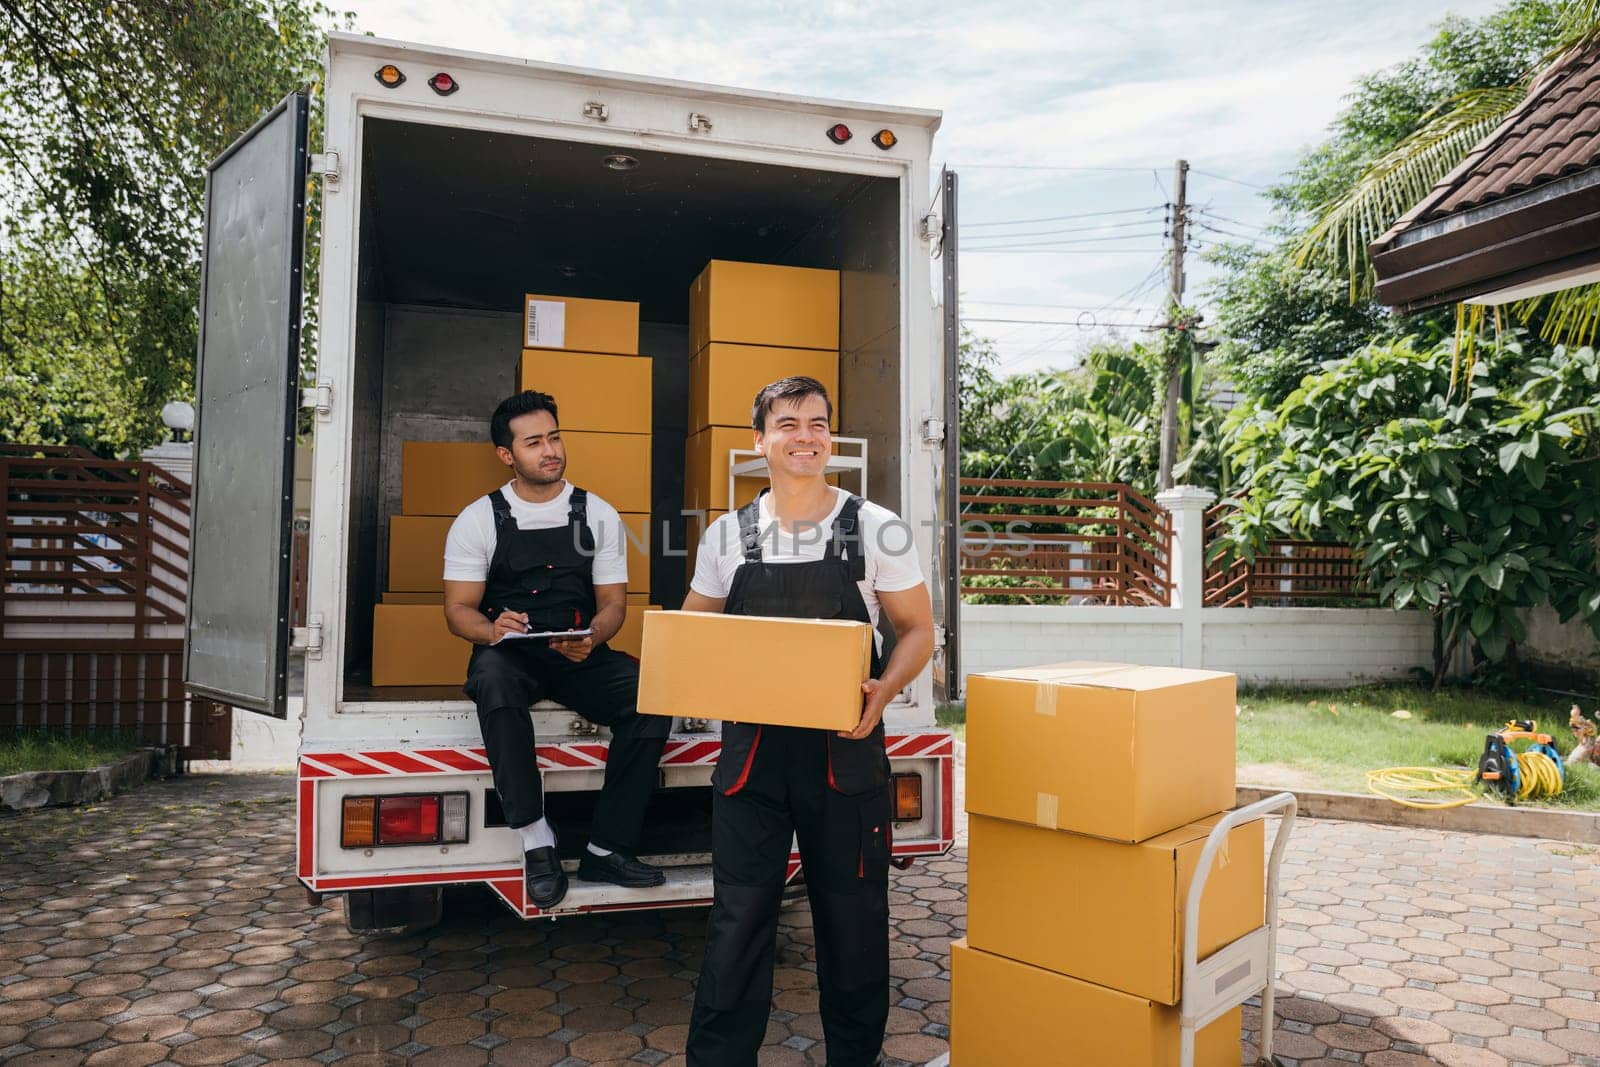 Delivery men unload boxes from a truck. Movers in uniform cooperate in a relocation service. Teamwork and cooperation among colleagues. Smiling workers carrying boxes. relocation teamwork Moving Day by Sorapop